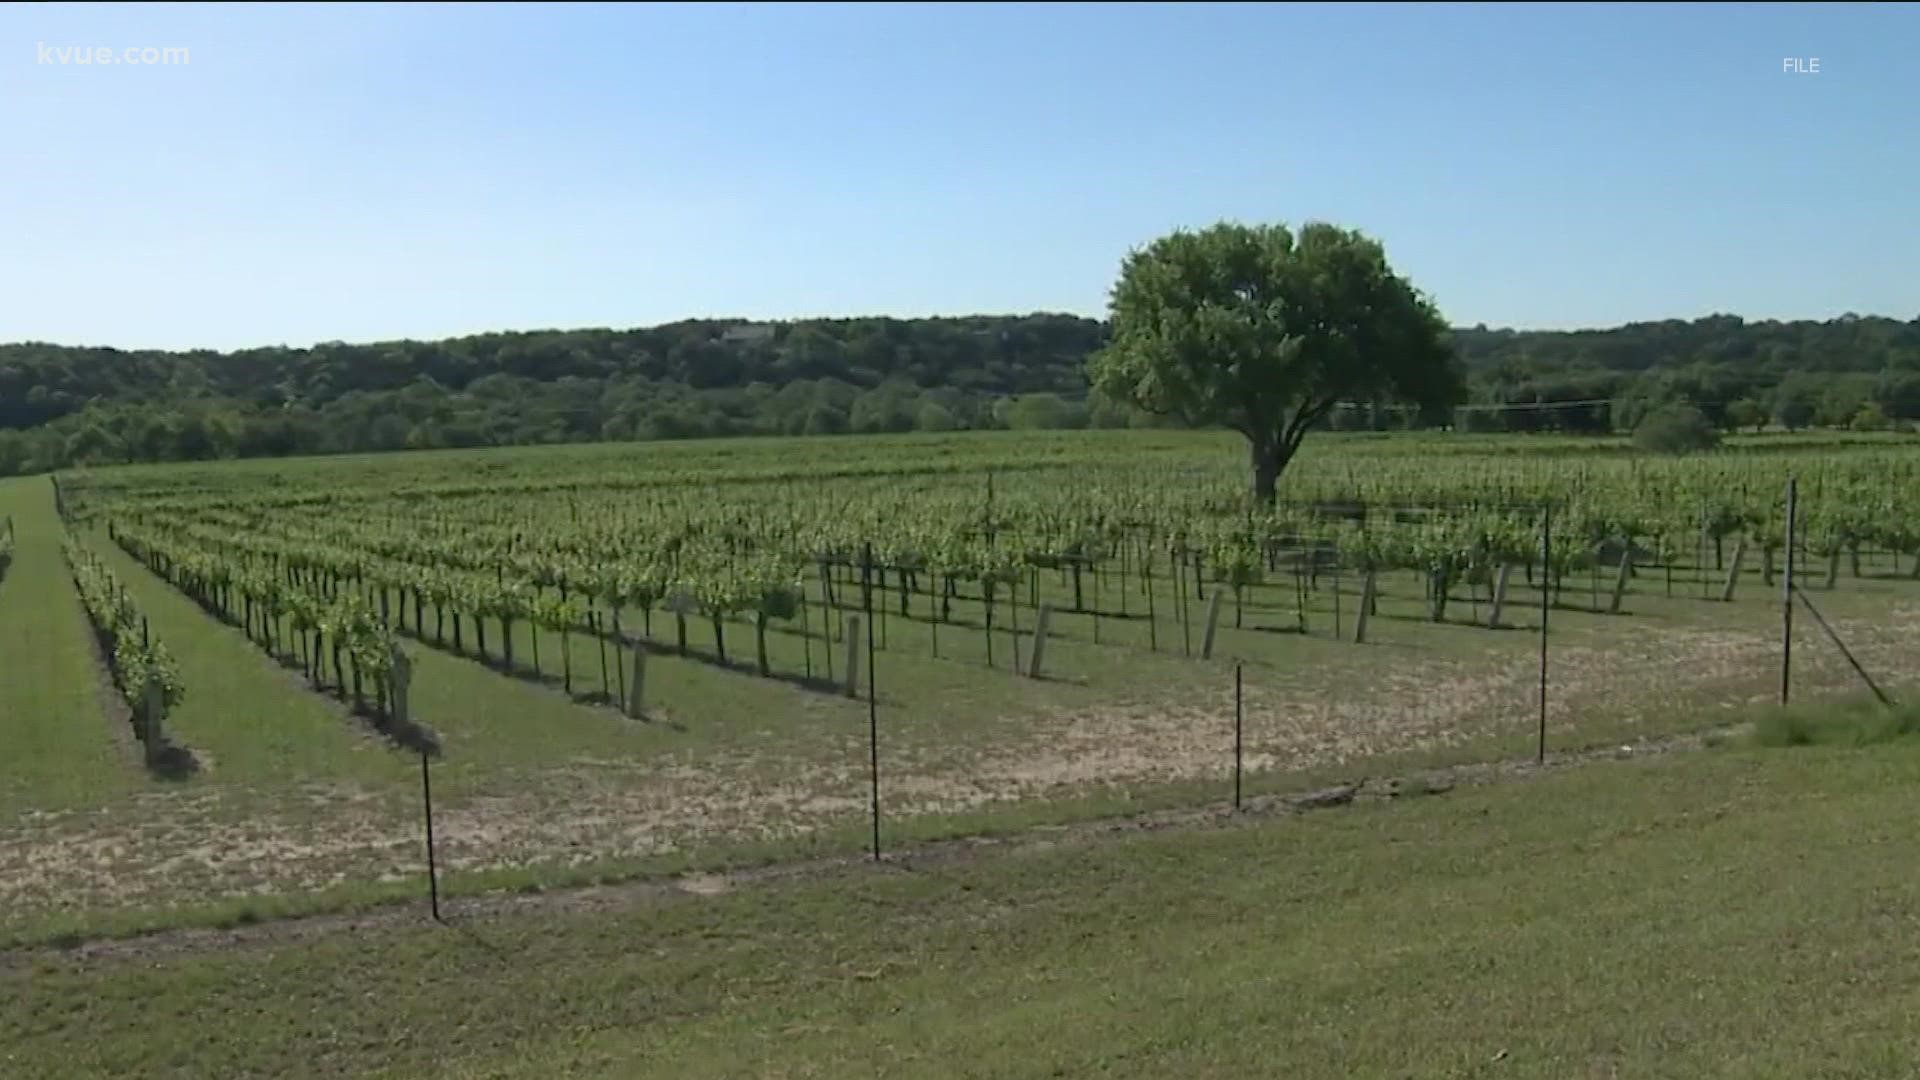 USA Today ranked the 10 best wine regions with the help of its readers. The Texas Hill Country came in at No. 3.